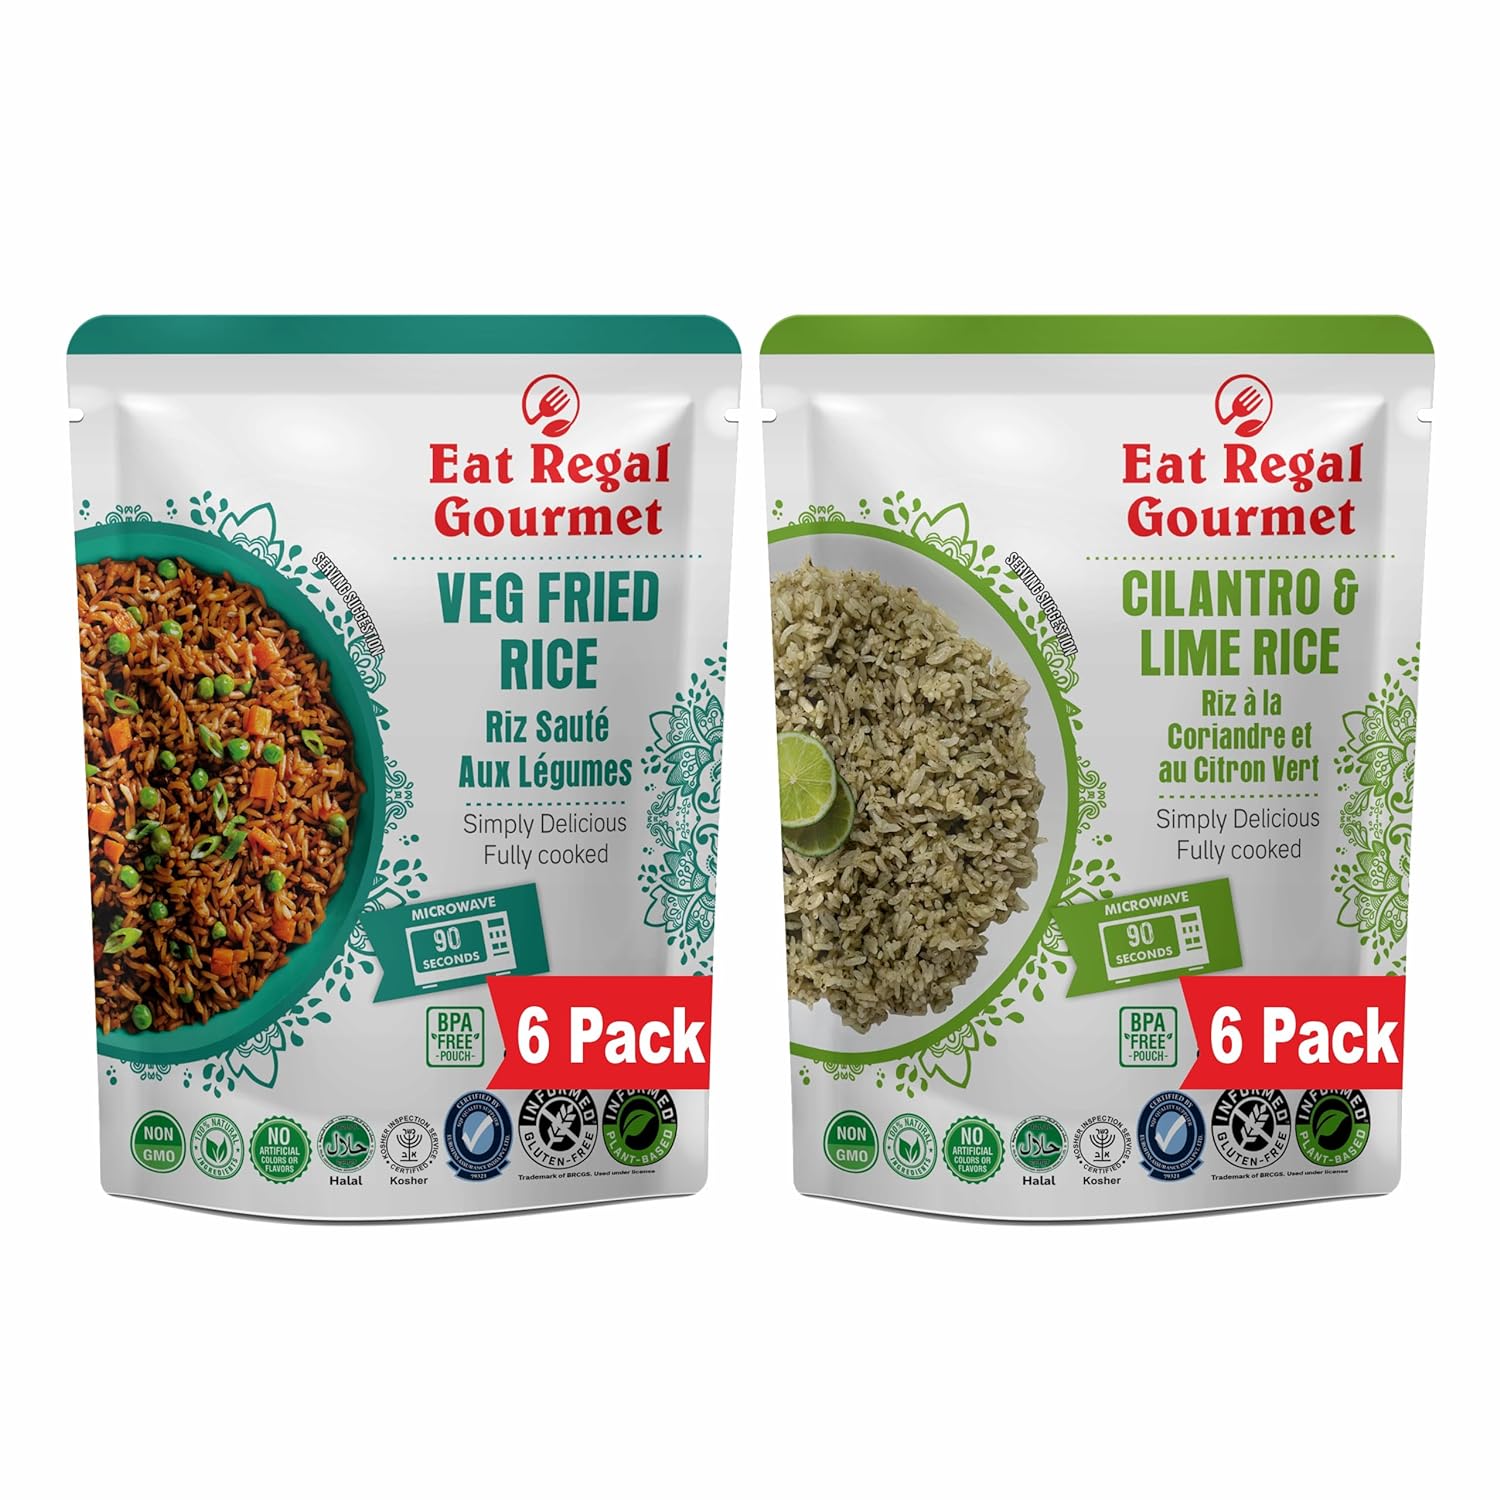 Cilantro - Lime Rice & Vegetable Fried Rice - 12 Pack